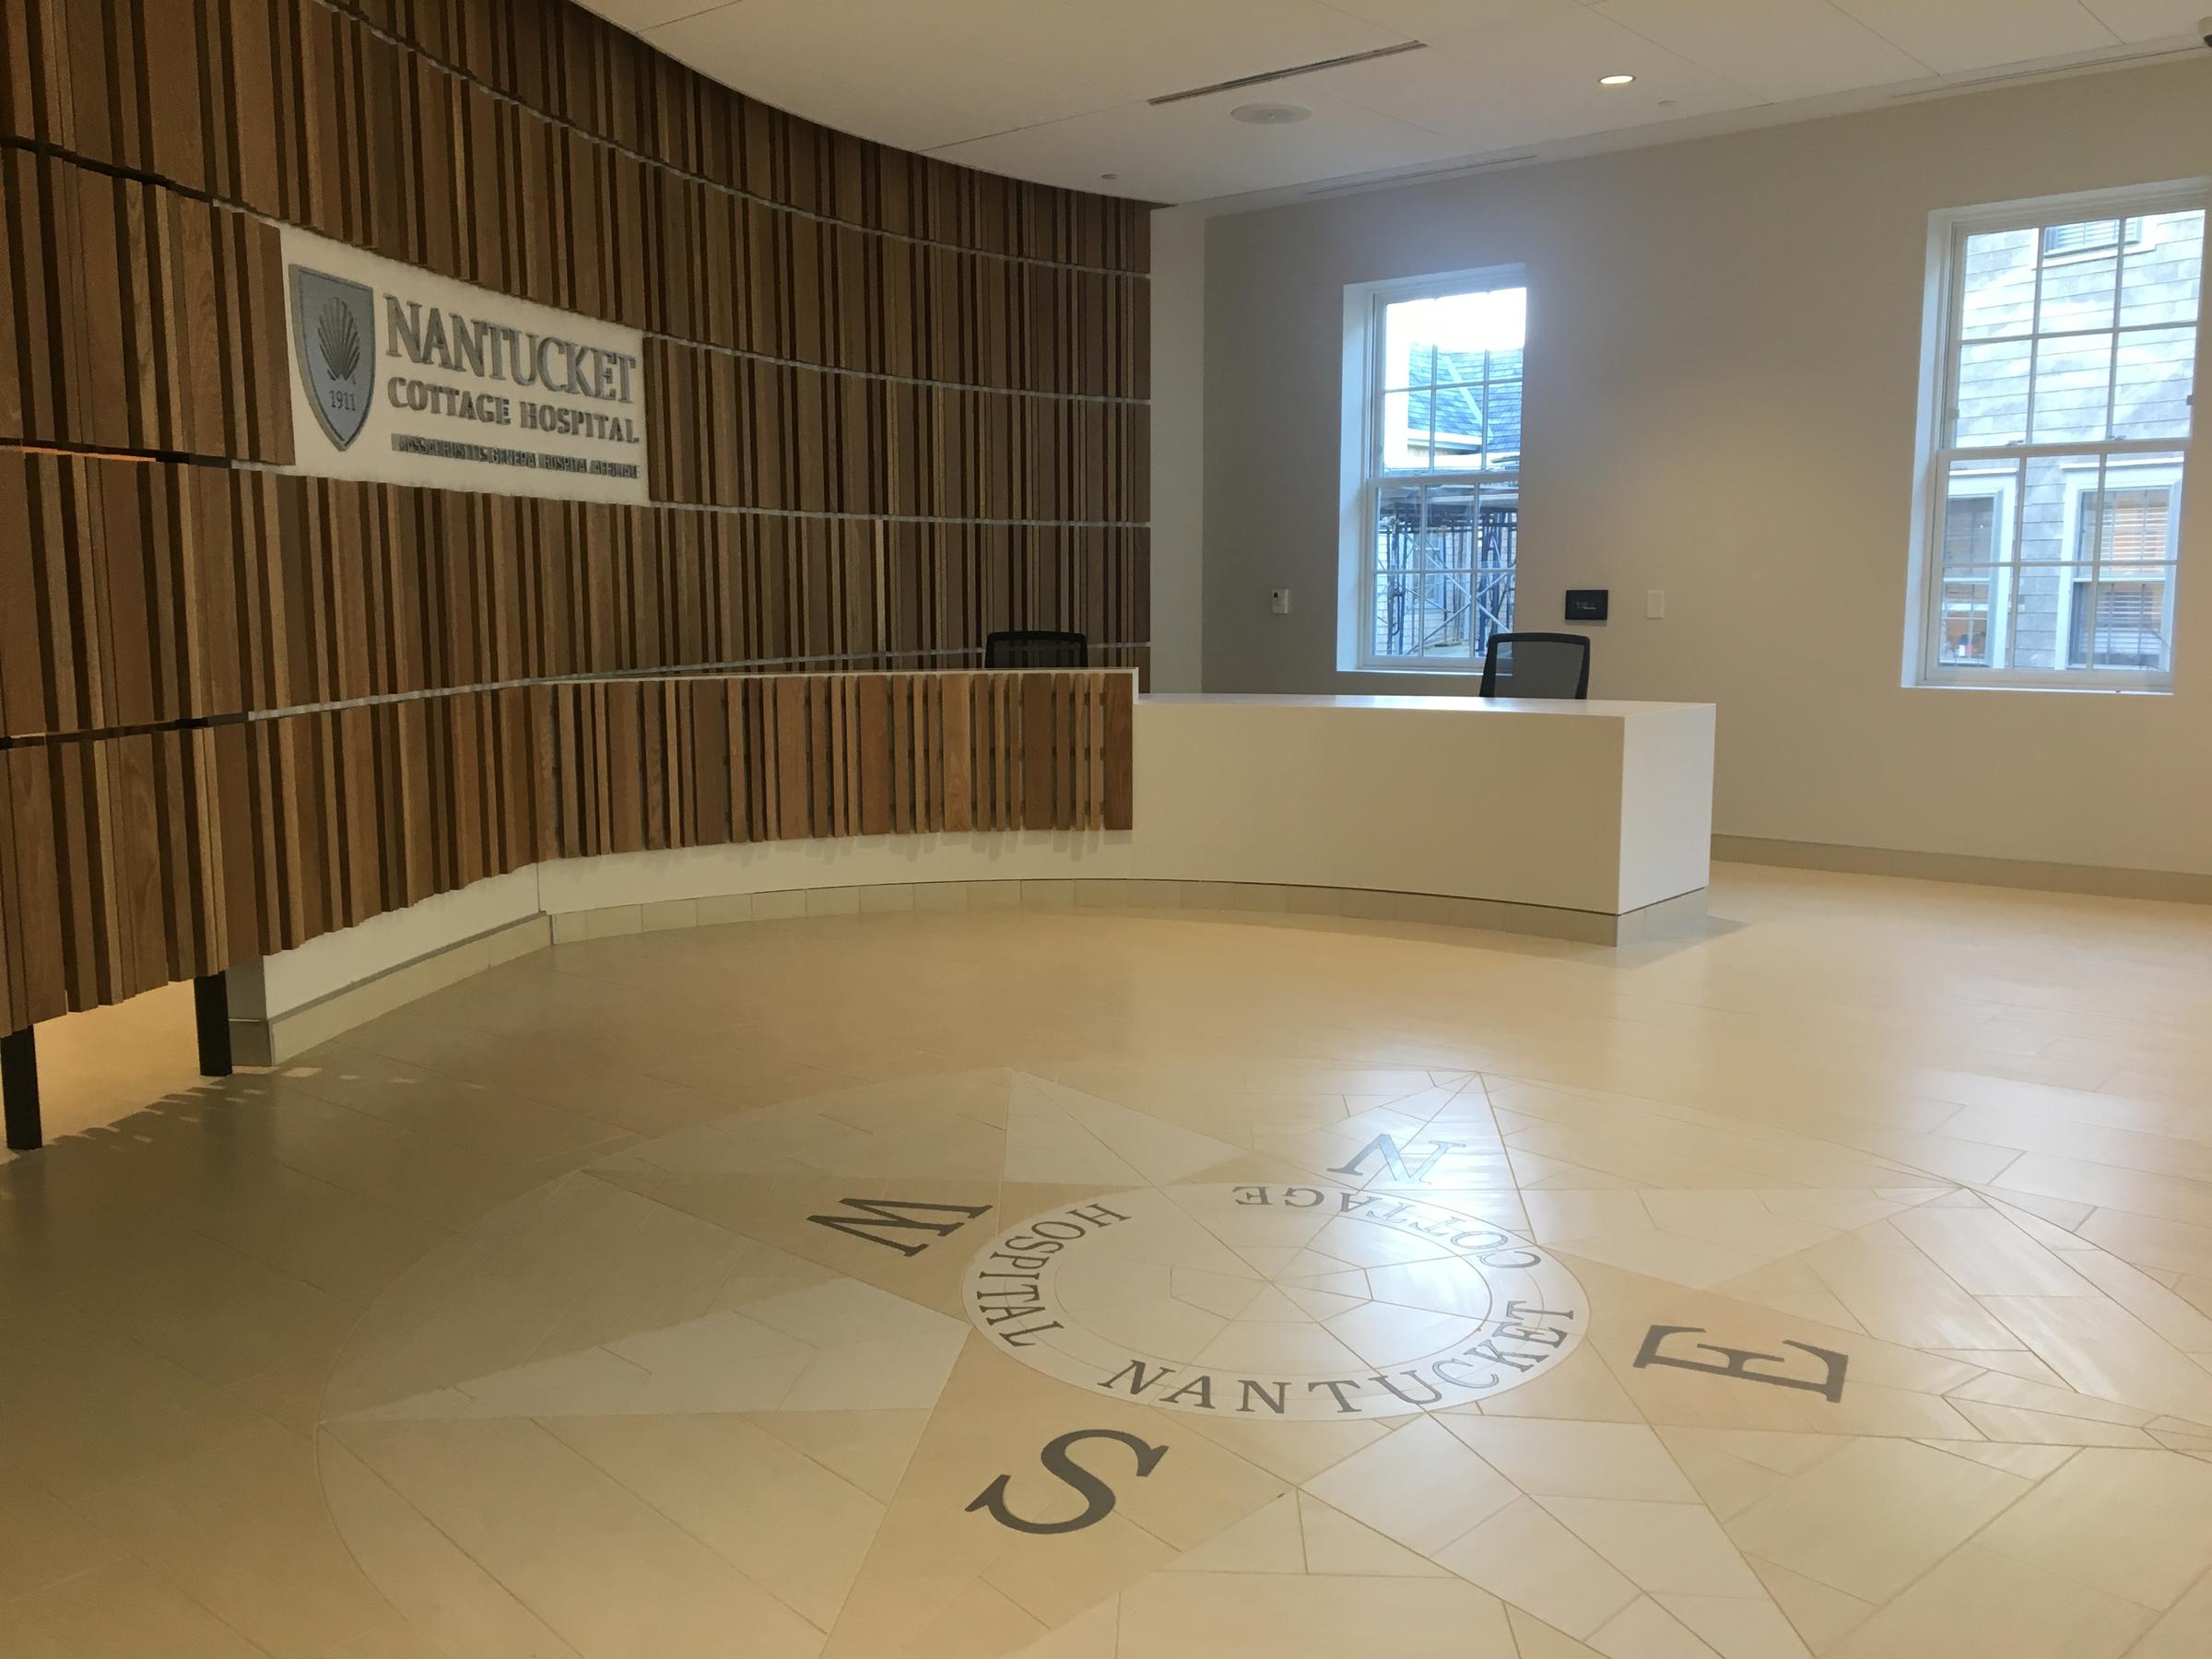 New Nantucket Cottage Hospital Keeps The Island Spirit In A